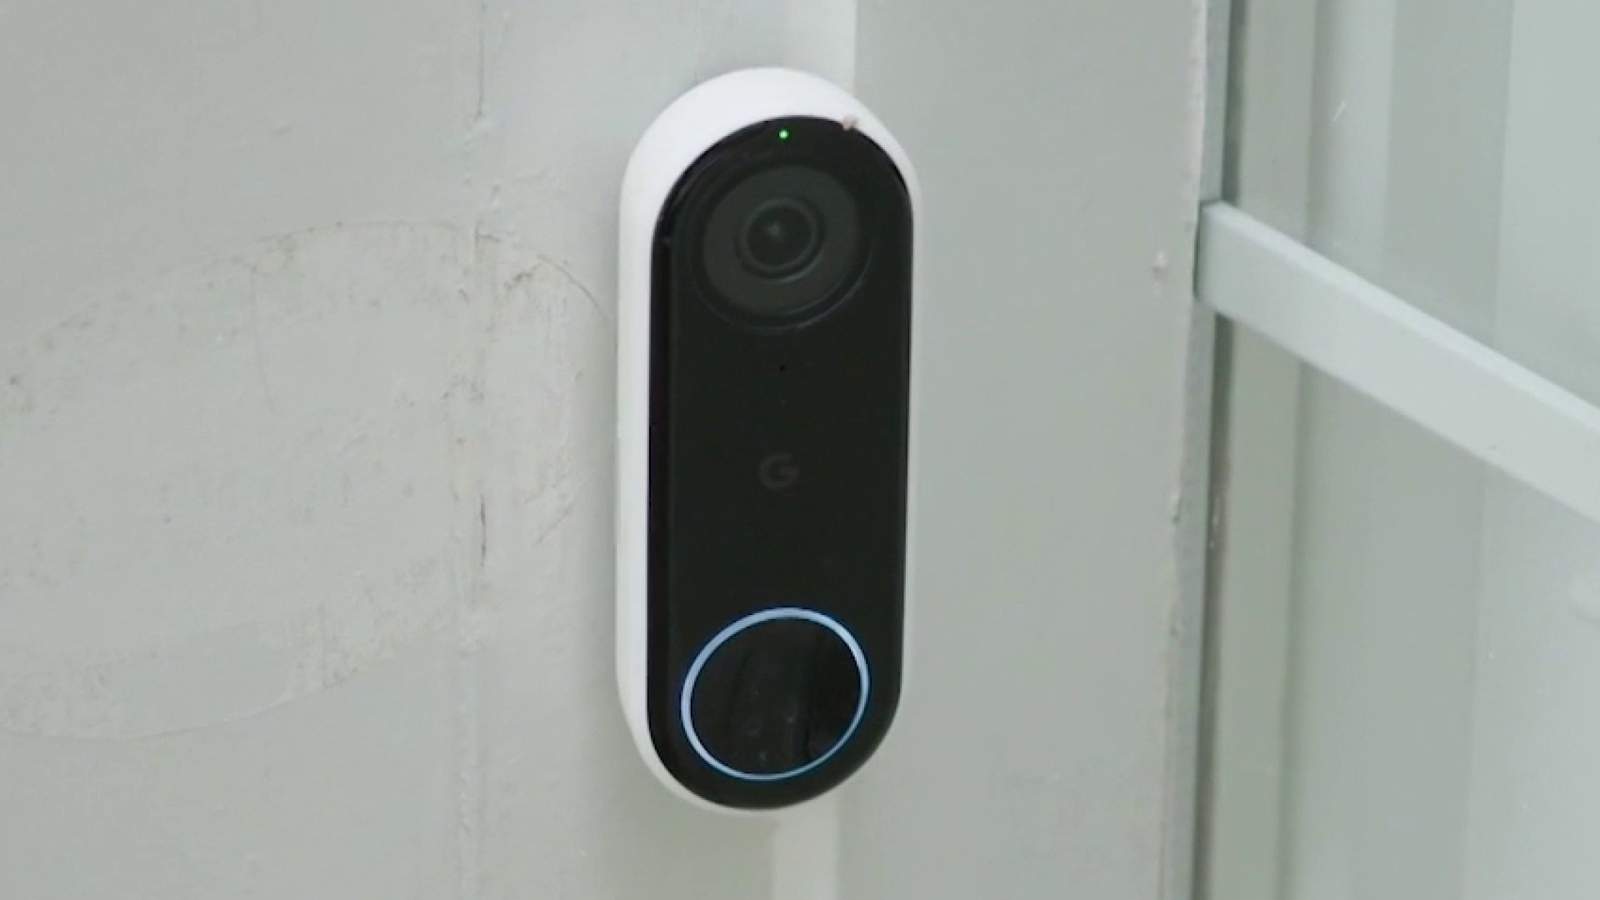 Think compatibility when buying a video doorbell, Consumer Reports says